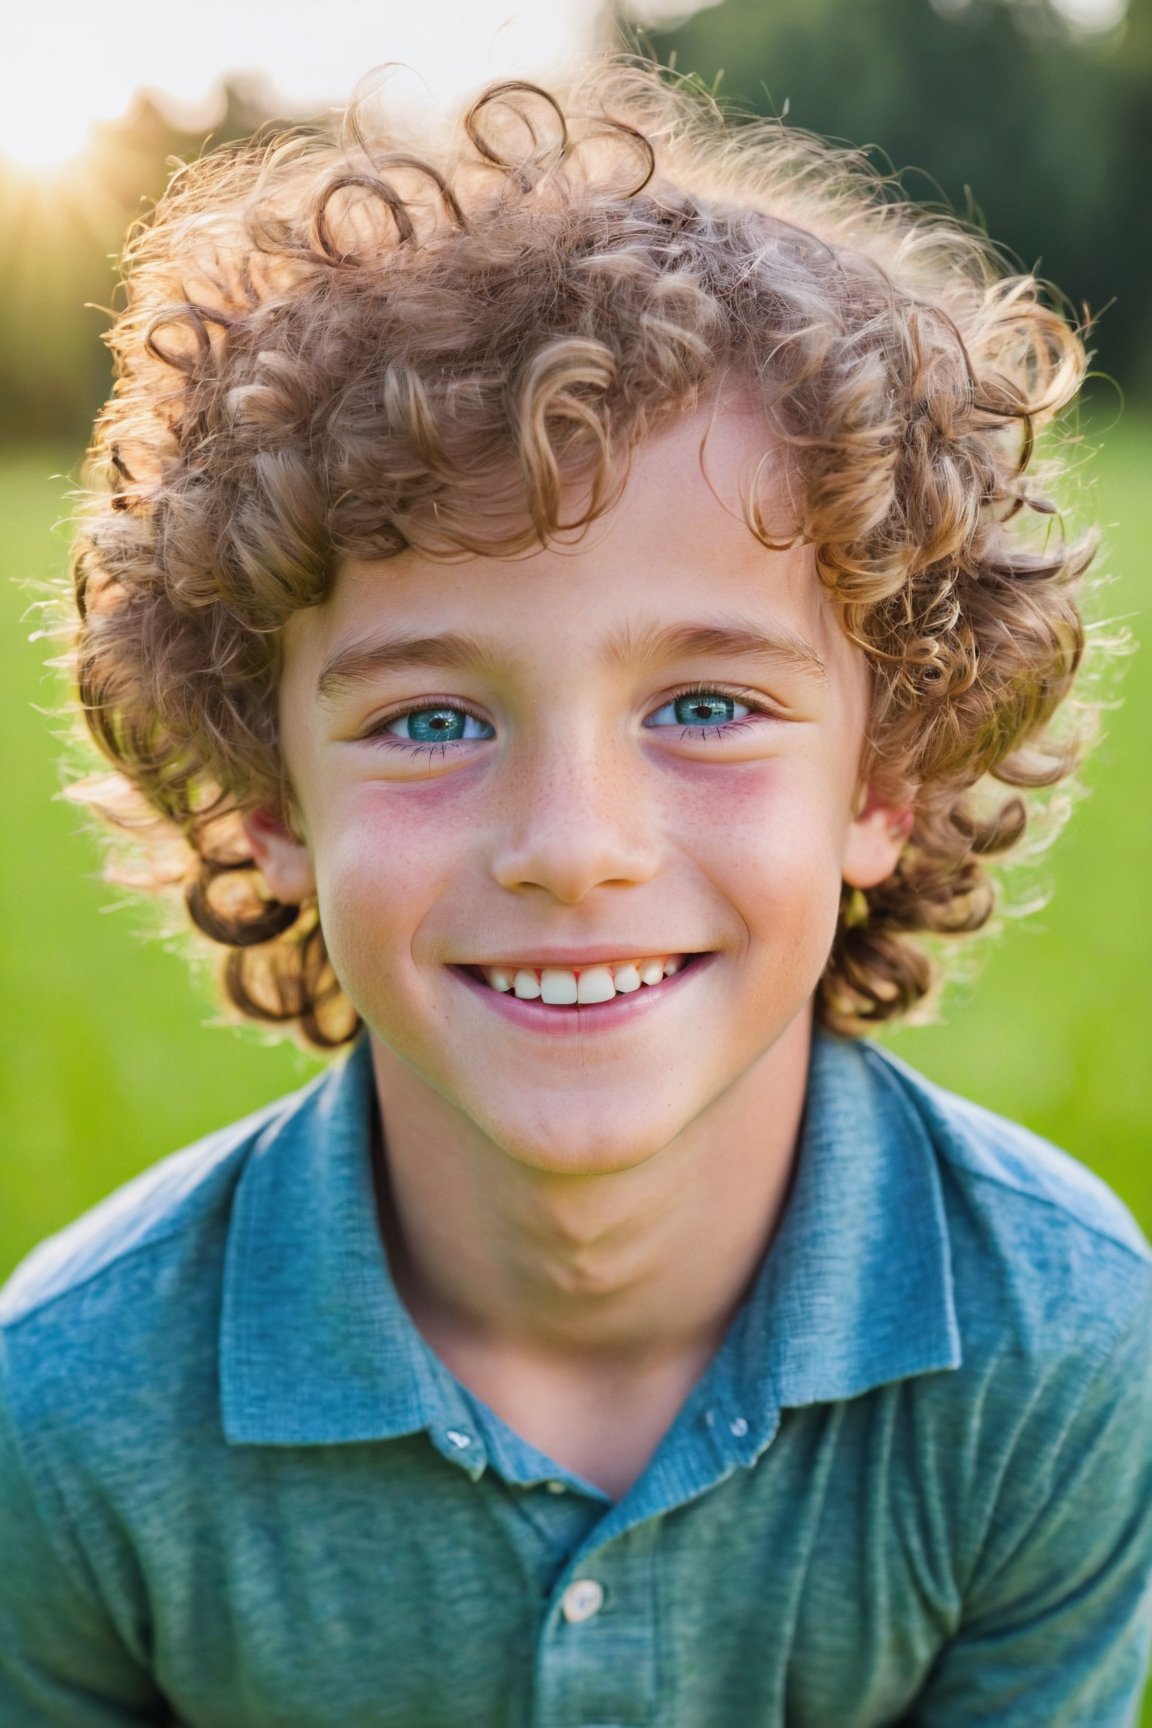 (best quality, highres, masterpiece:1.2), beautiful detailed face,  cute smile, outdoor, boy, blue eyes, soft curly hair, lively expression, playful pose, vibrant colors, warm sunlight, green grass, trees in the background,<lora:EMS-89672-EMS:0.800000>